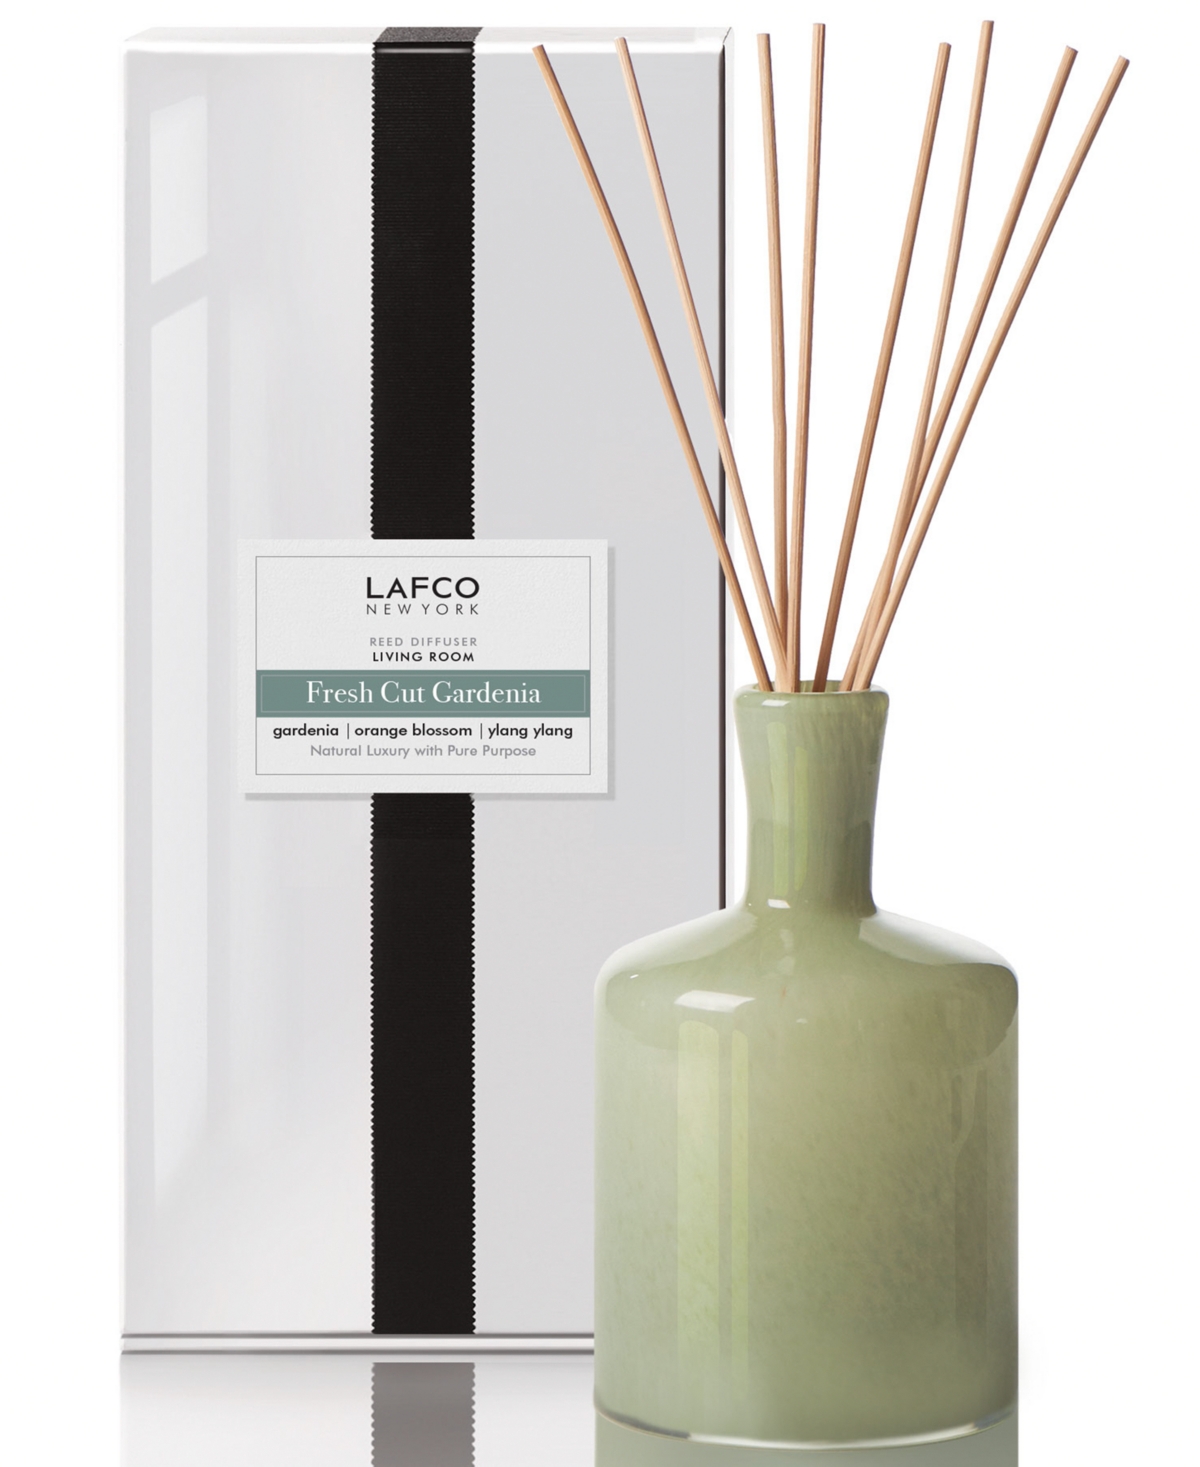 Lafco New York Fresh Cut Gardenia Living Room Classic Reed Diffuser, 6-oz. In Md. Green